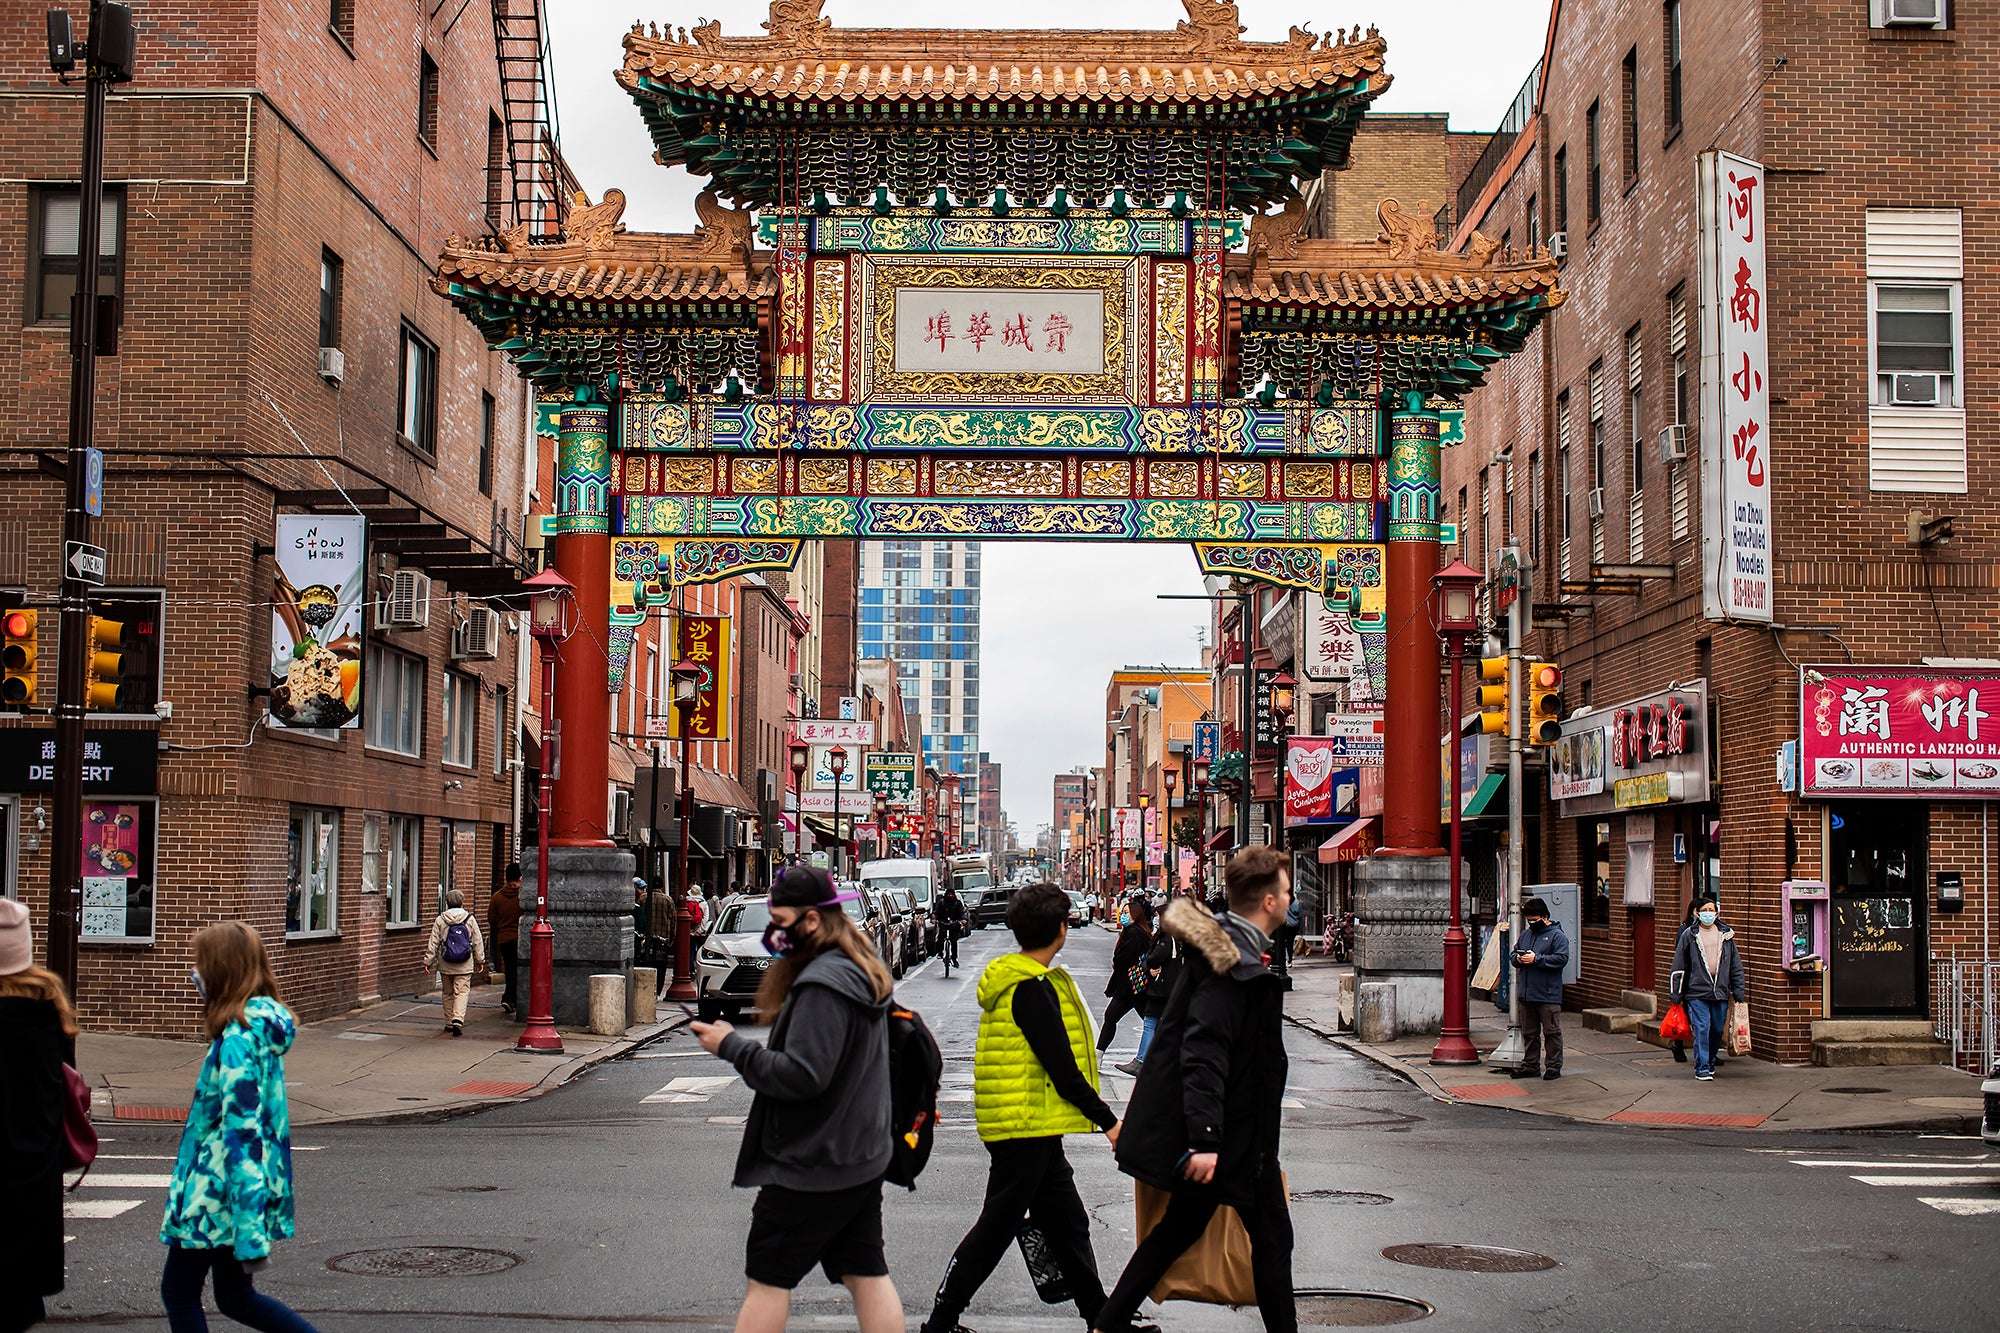 The iconic “Frienship Gate” at 10th and Arch St. marks the entrance to Philadelphia’s historic Chinatown.